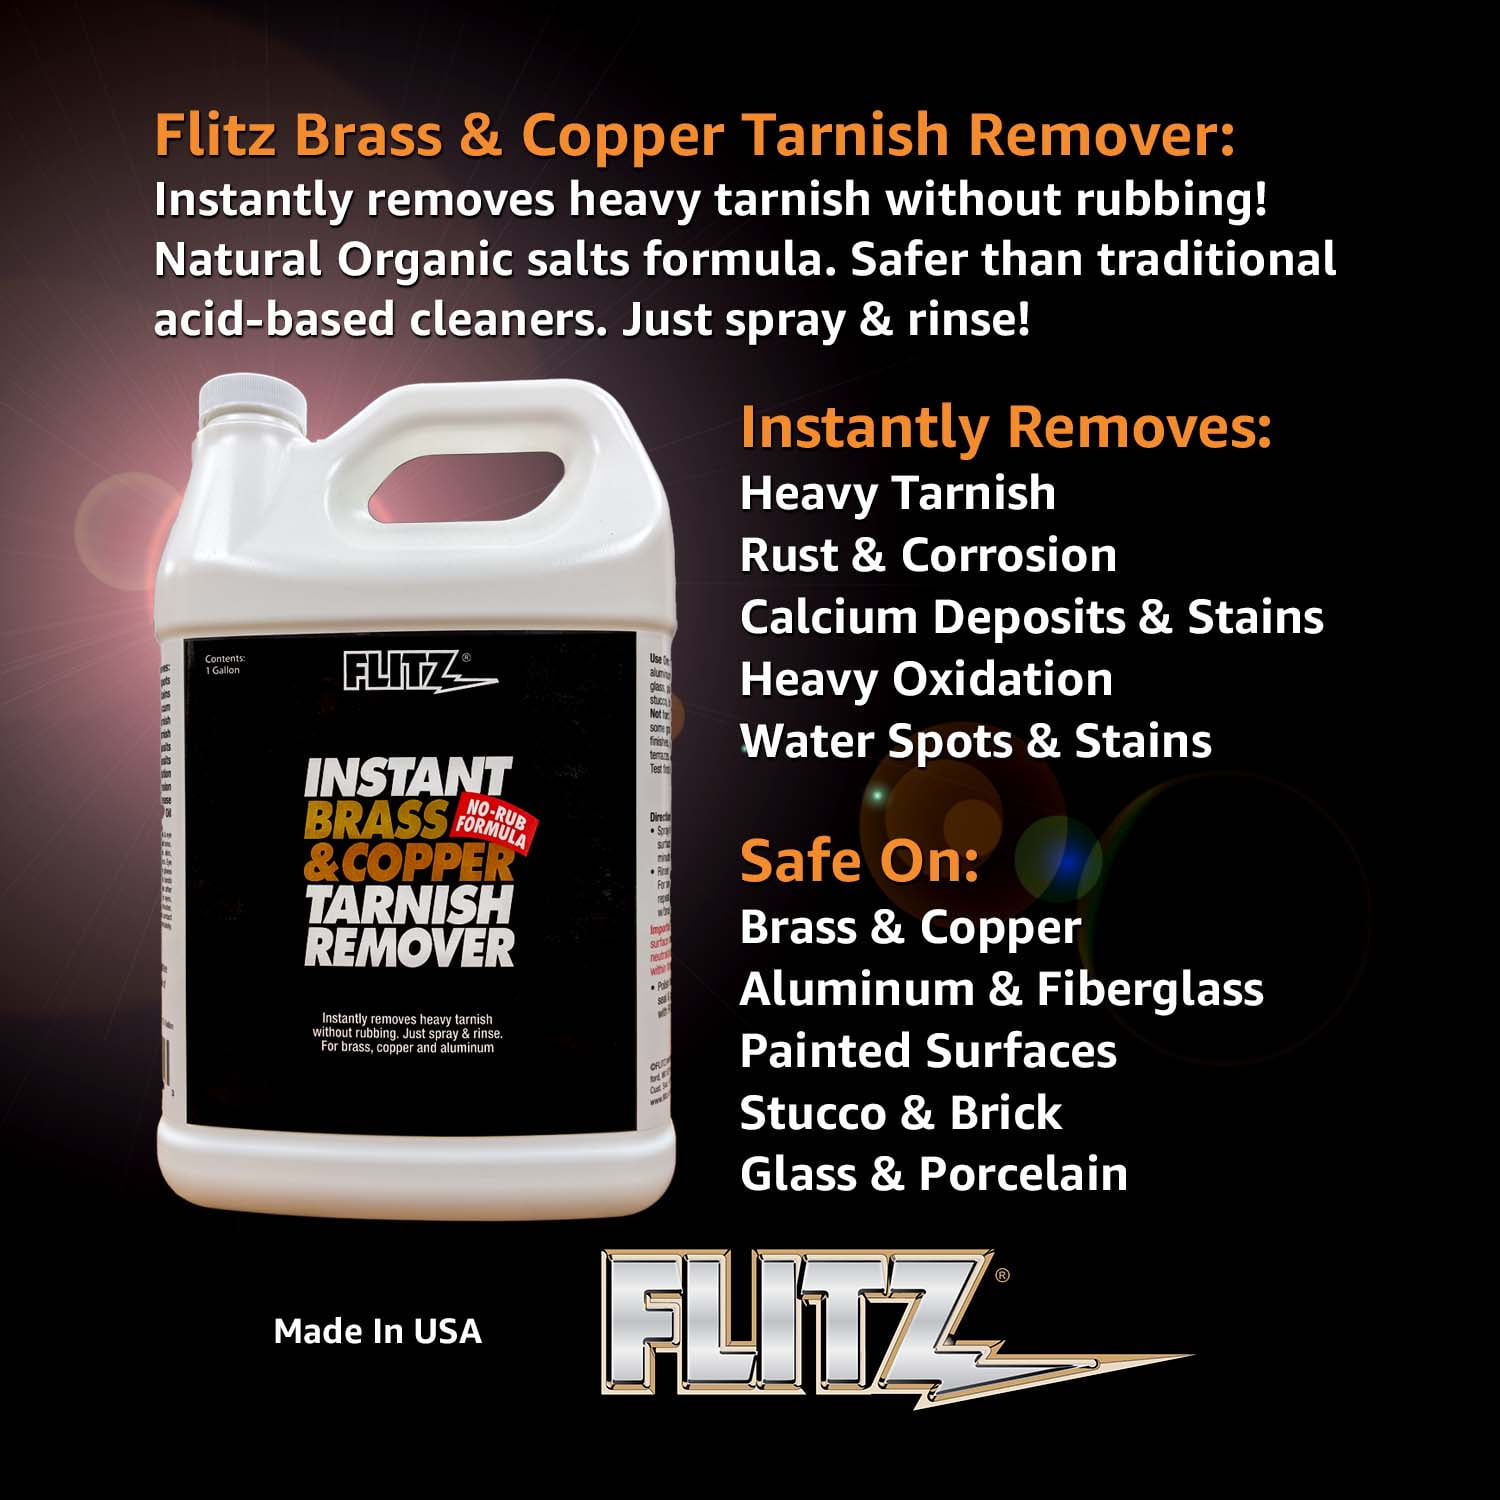 Flitz Brass & Copper Tarnish Remover, Met-all Copper Polish, Cleaning Cloth